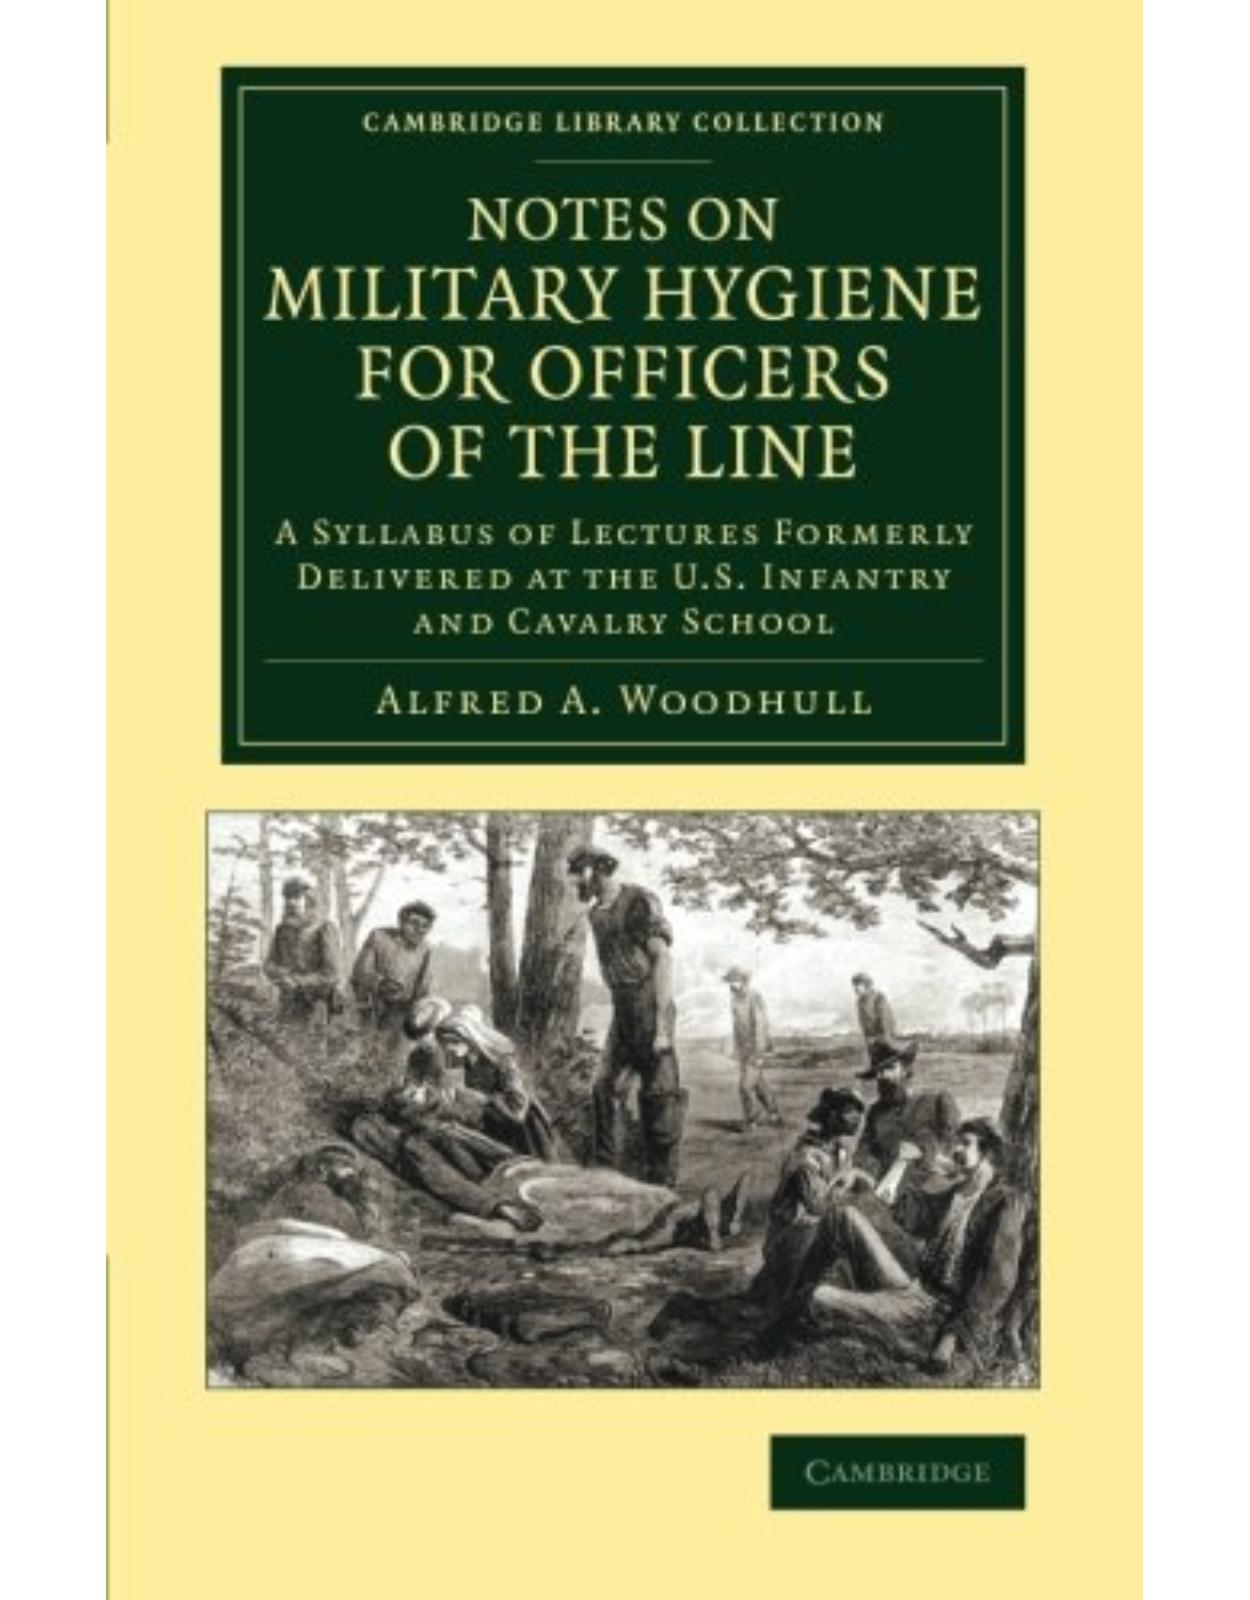 Notes on Military Hygiene for Officers of the Line: A Syllabus of Lectures Formerly Delivered at the U.S. Infantry and Cavalry School (Cambridge Library Collection - History of Medicine)